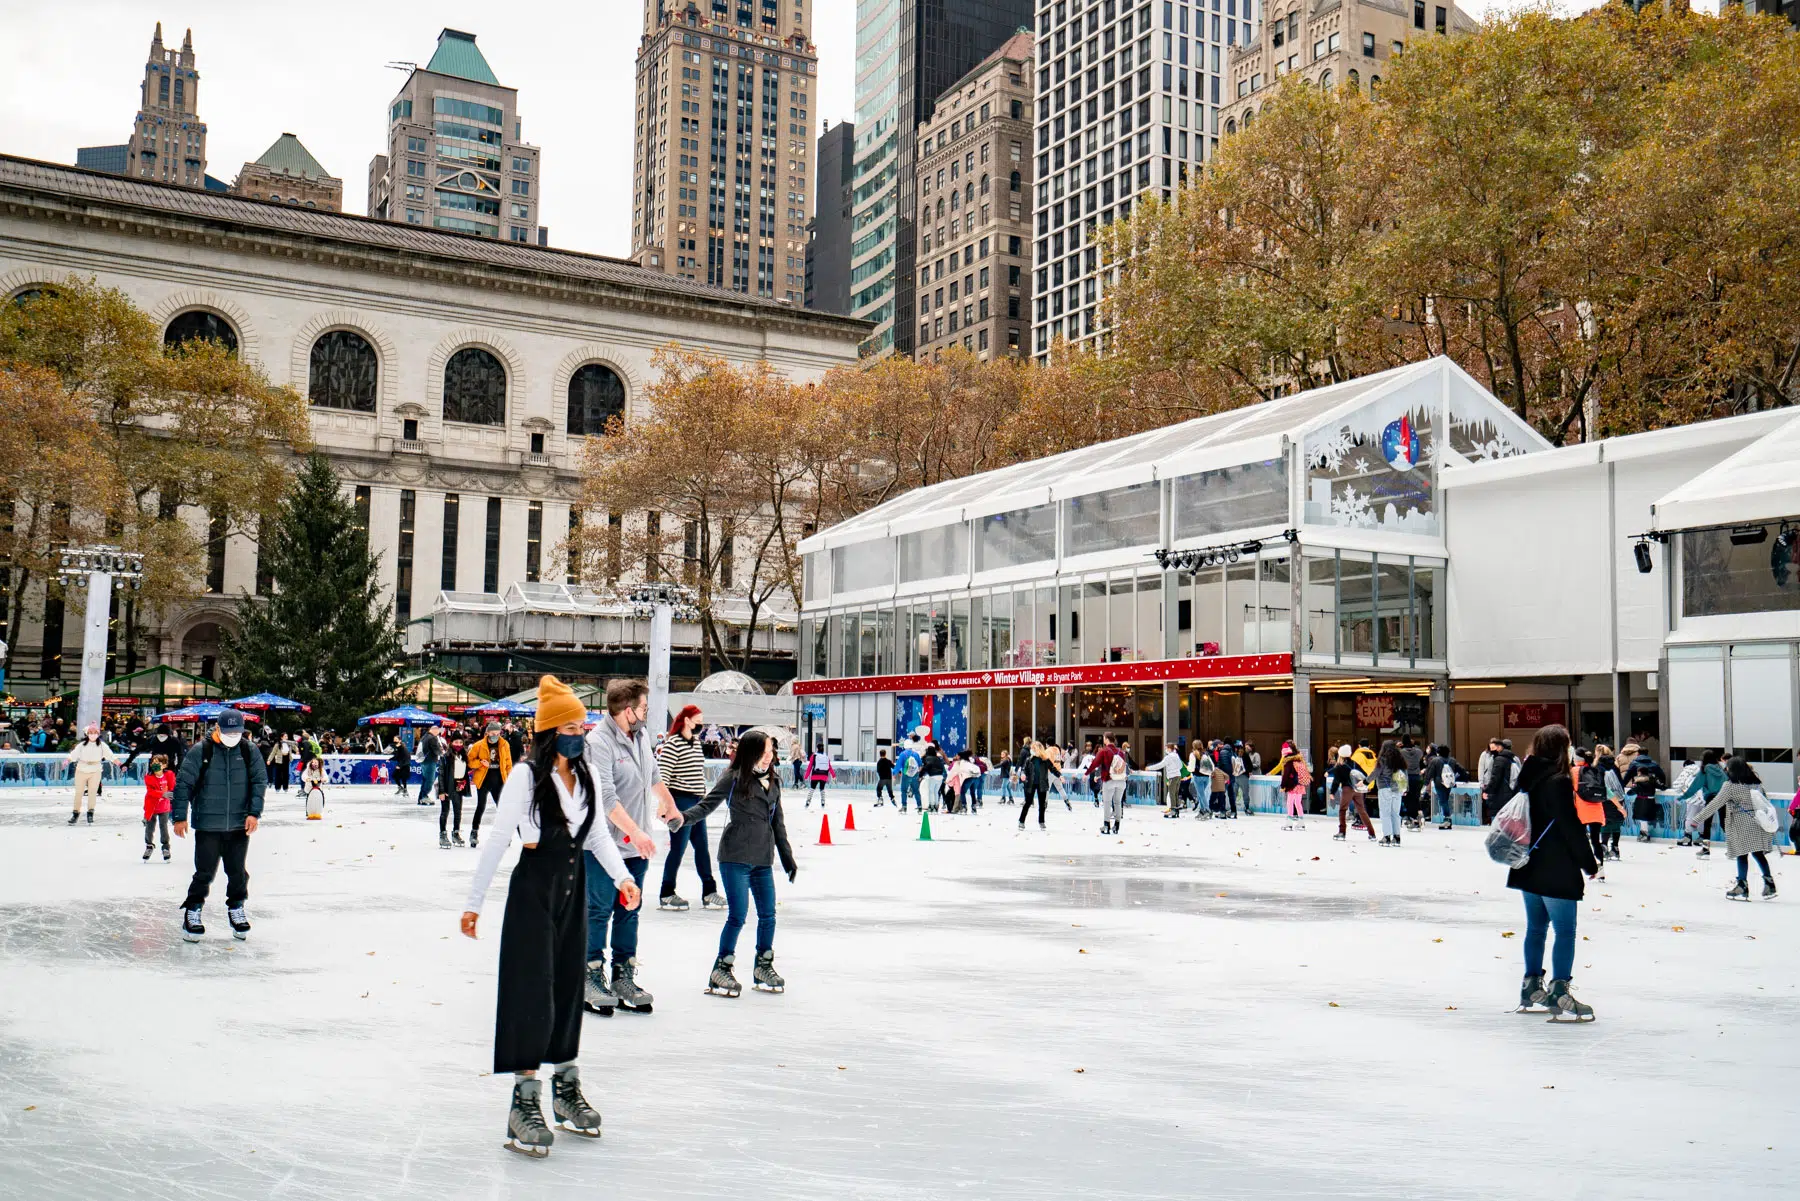 Ice skating at Bryant Park Winter Village, visiting New York City in March